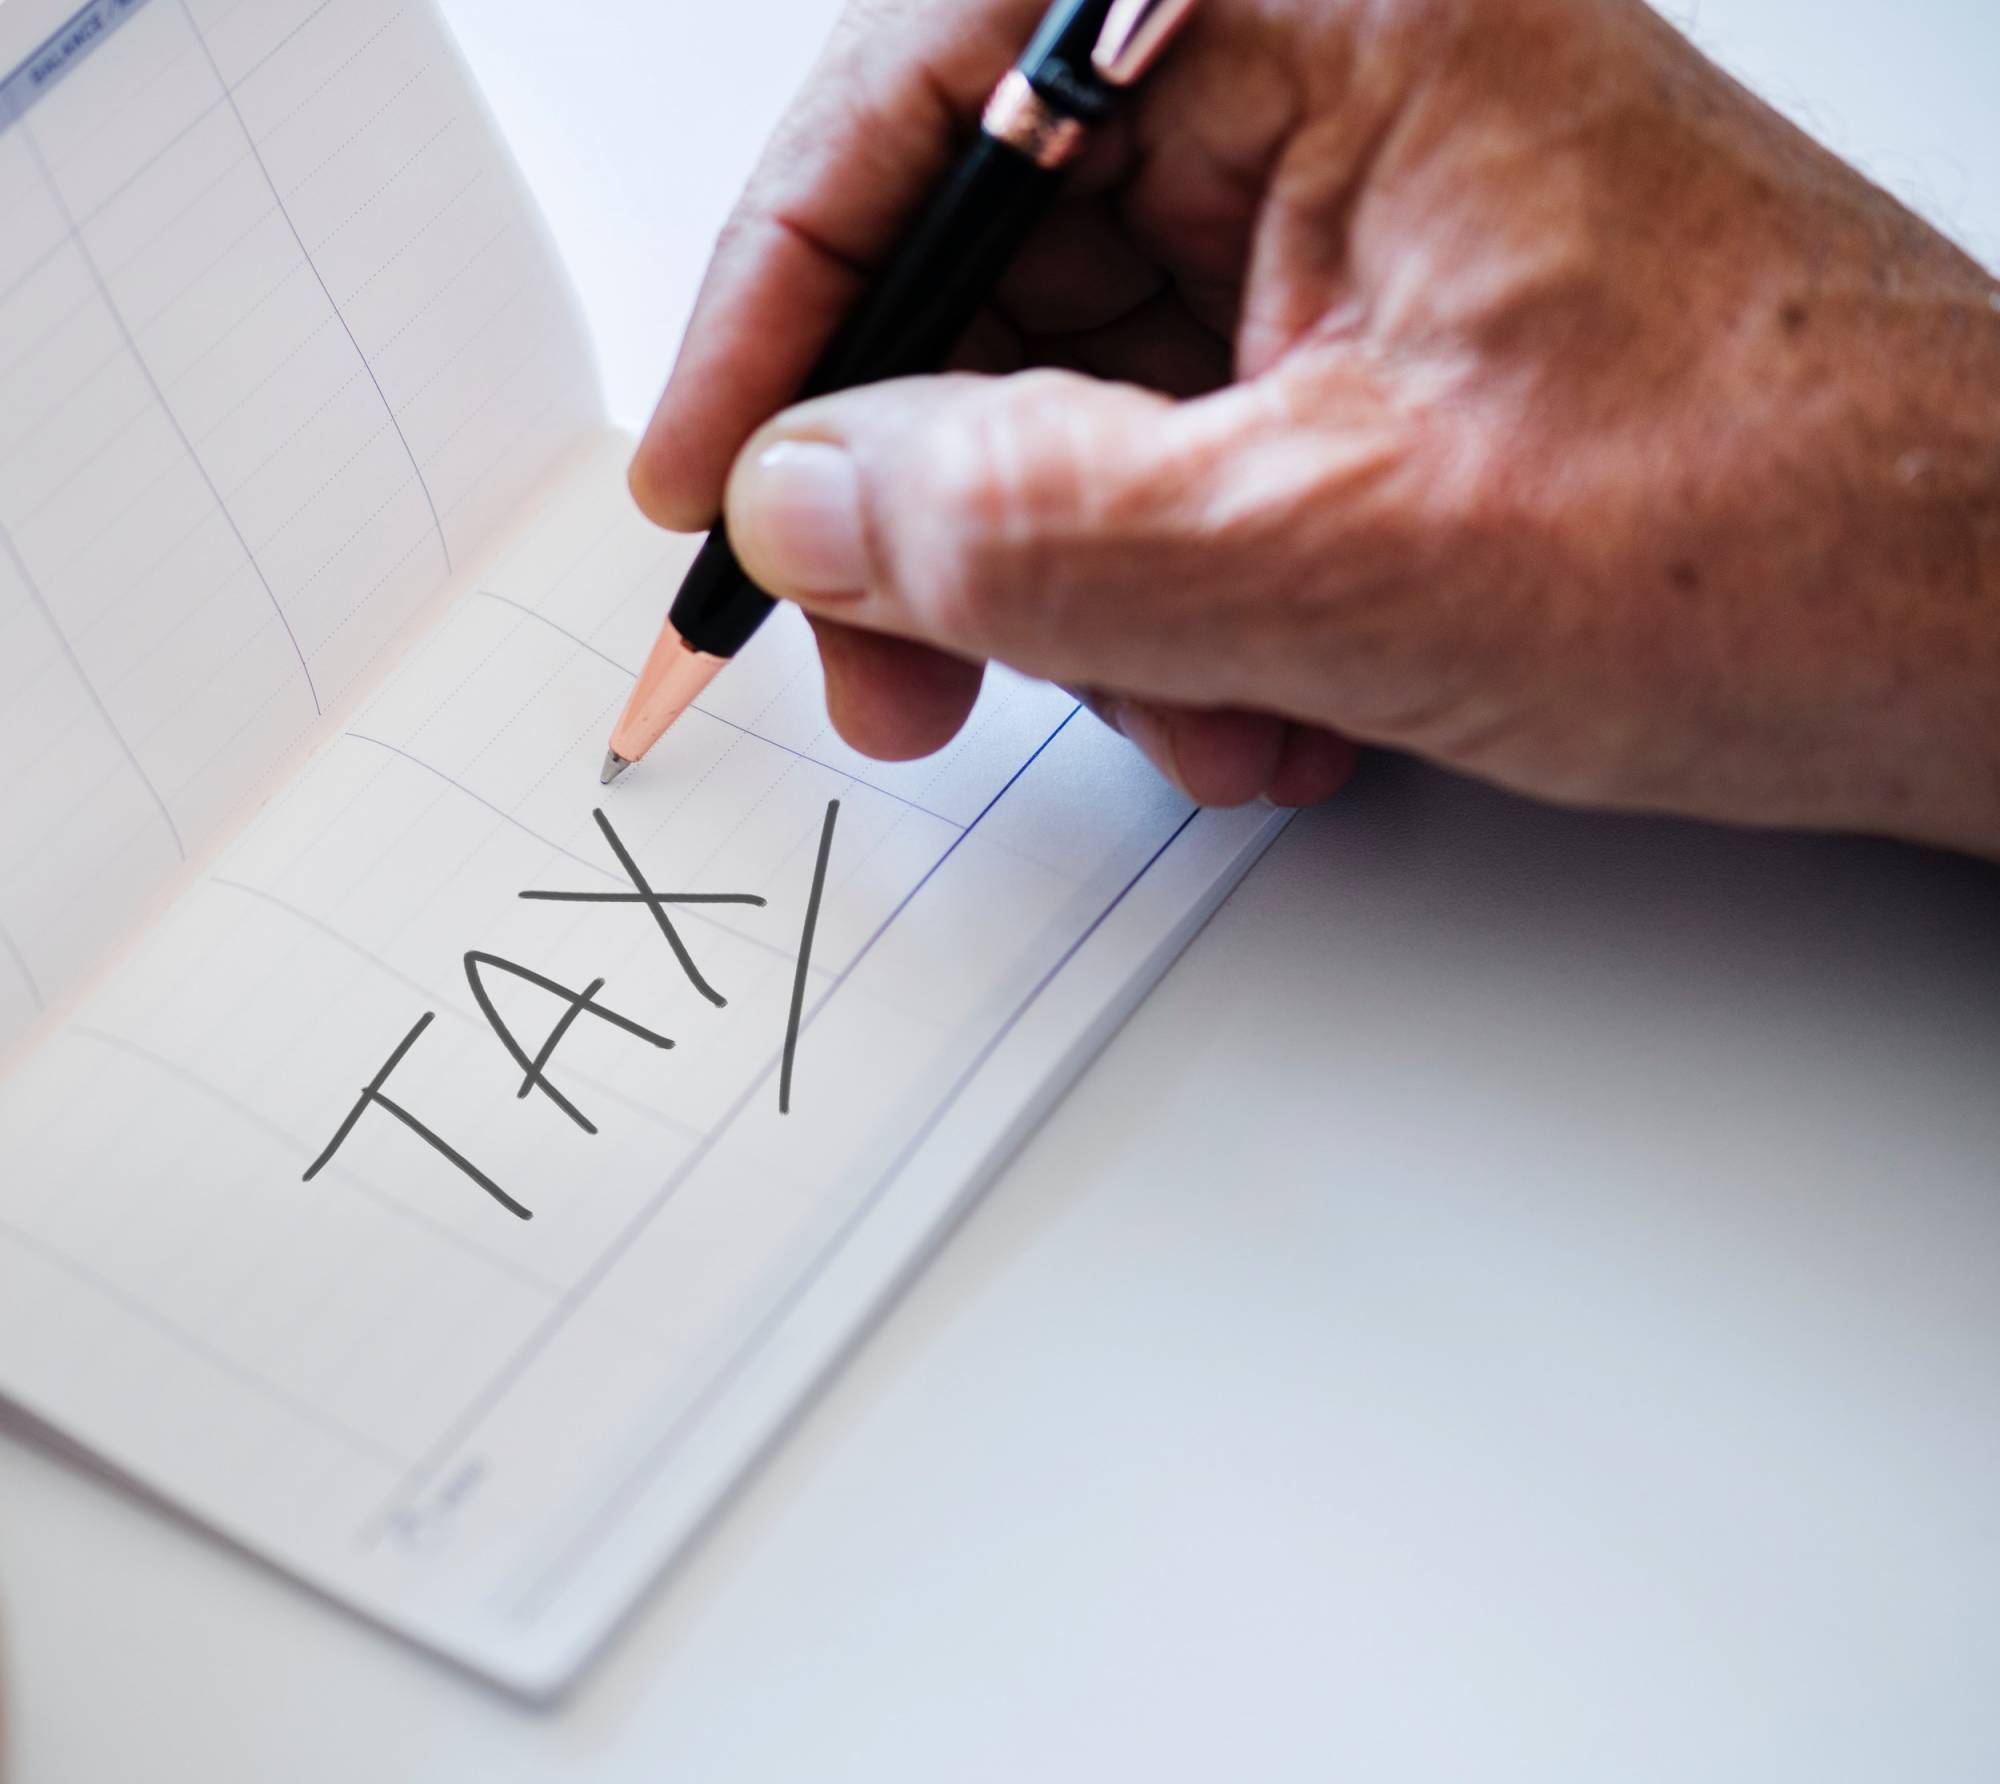 Assistance with filing and preparation of tax returns